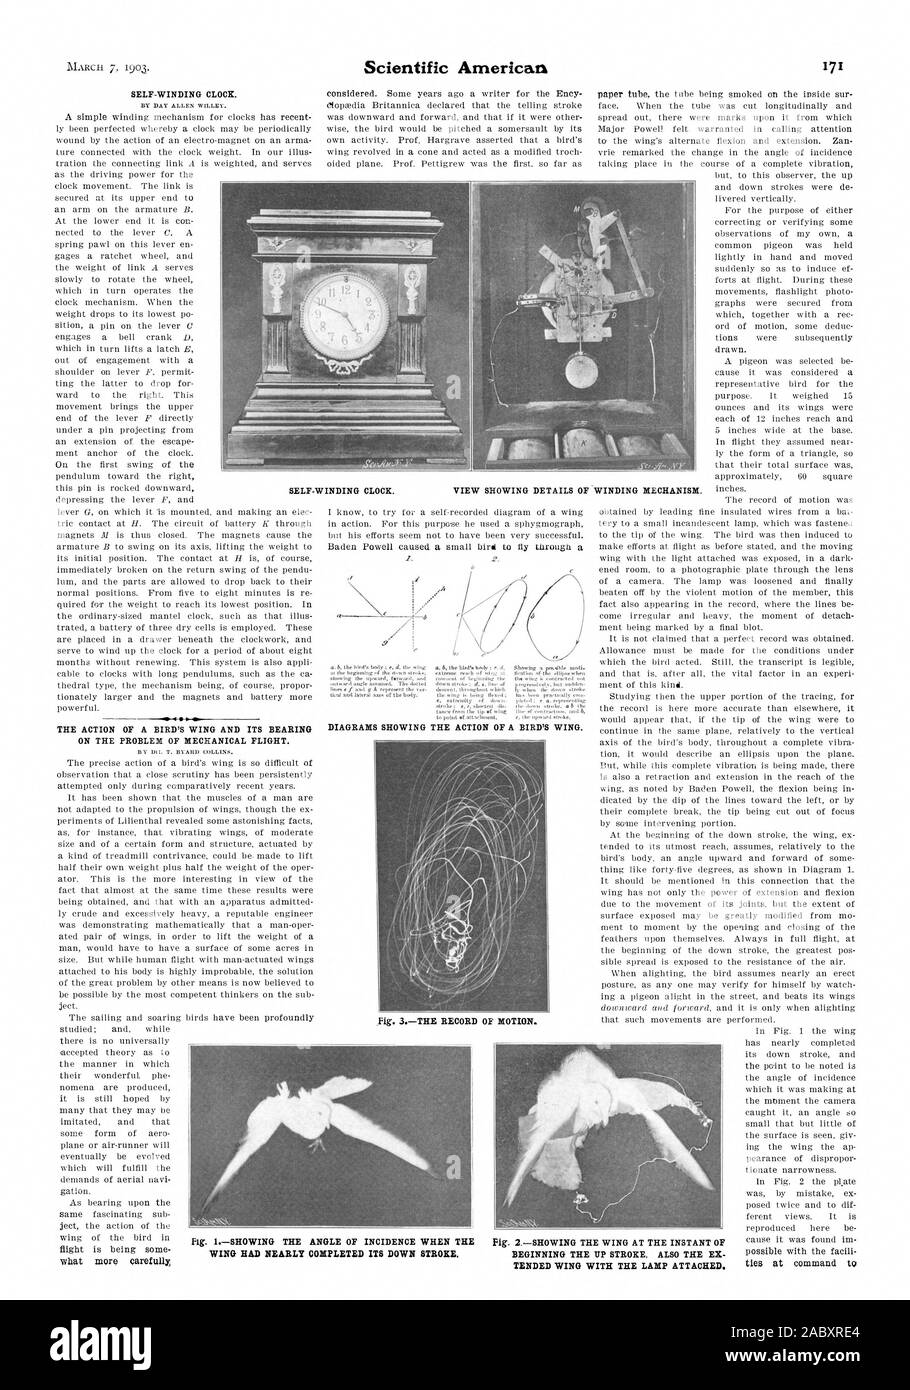 SELF-WINDING CLOCK. -me THE ACTION OF A BIRD'S WING AND ITS BEARING ON THE PROBLEM OF MECHANICAL FLIGHT. 1. DIAGRAMS SHOWING THE ACTION OF A BIRD'S WING. WINS HAD NEARLY COMPLETED ITS DOWN STROKE. TENDED WING WITH THE LAMP ATTACHED., scientific american, 1903-03-07 Stock Photo